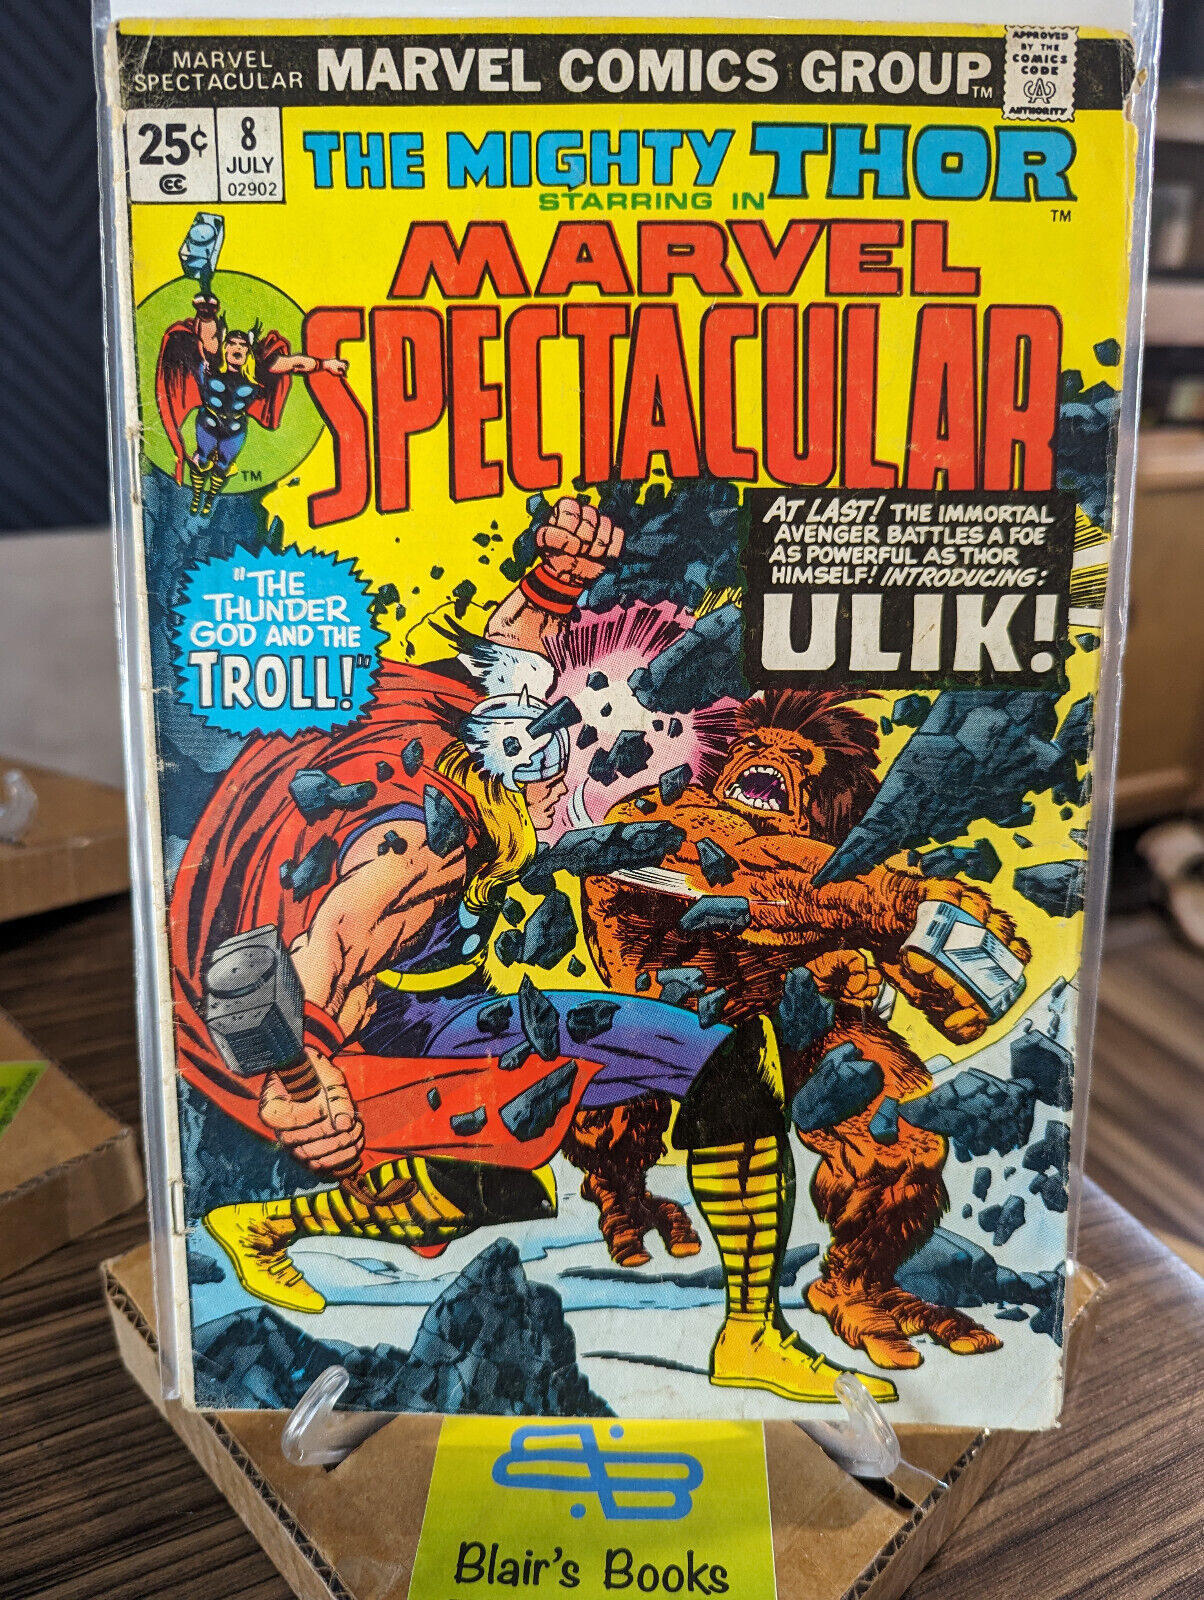 Bronze Age MARVEL SPECTACULAR #8 [1974] VG 4.0; Lee/Kirby Reprint of Thor #137